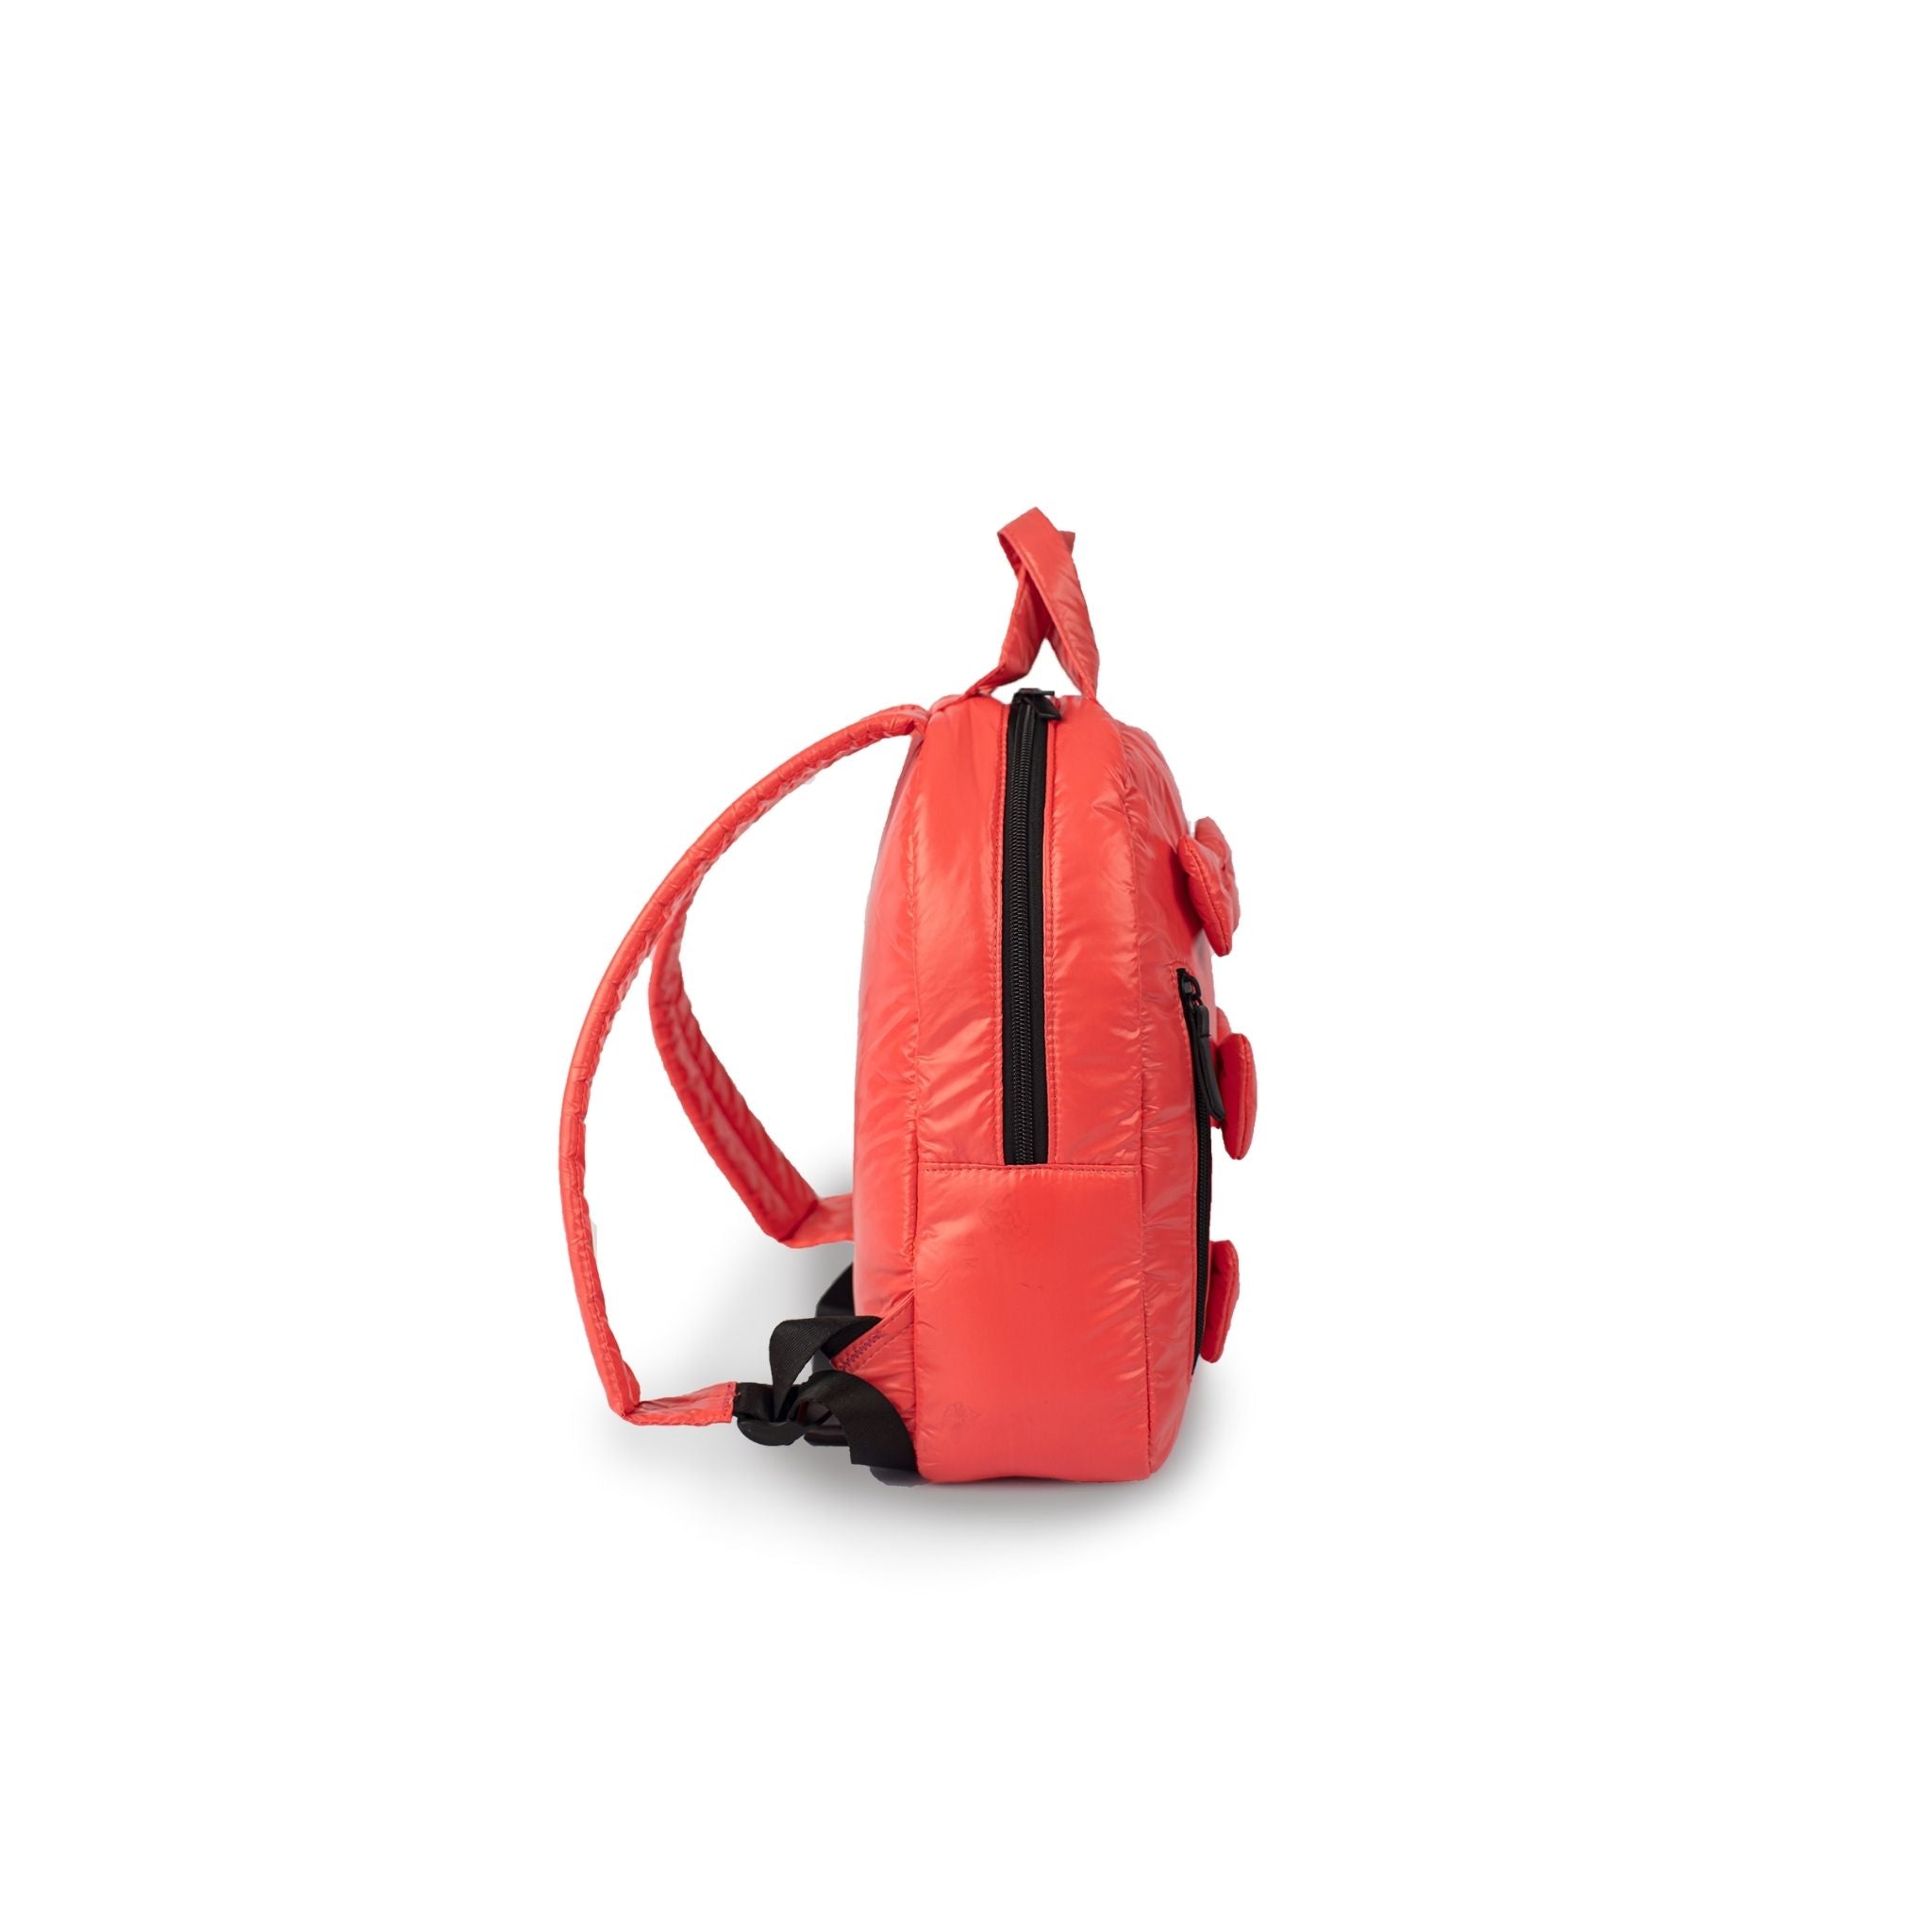 Bows Backpack - Coral